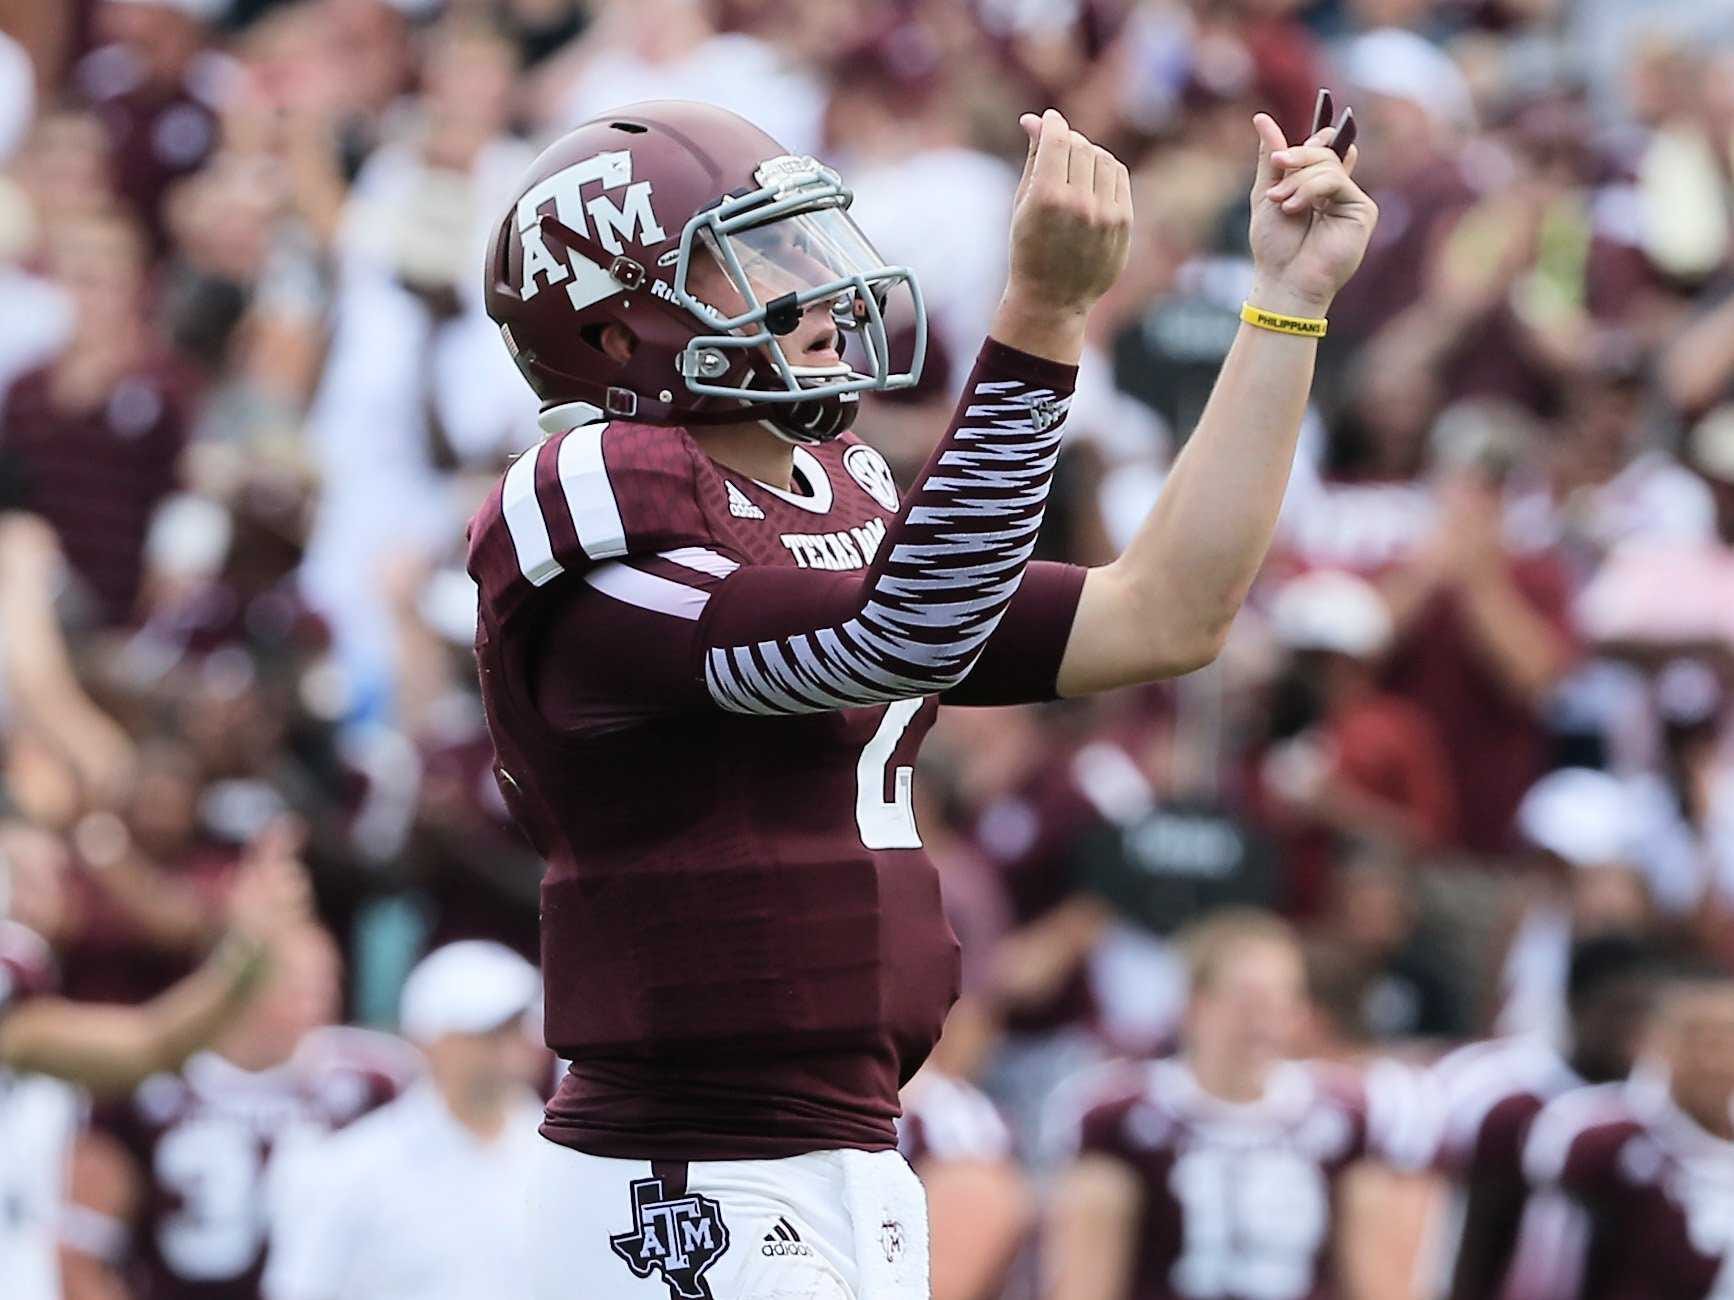 johnny-manziel-threw-his-first-touchdown-pass-and-then-did-the-show-me-the-money-celebration.jpg